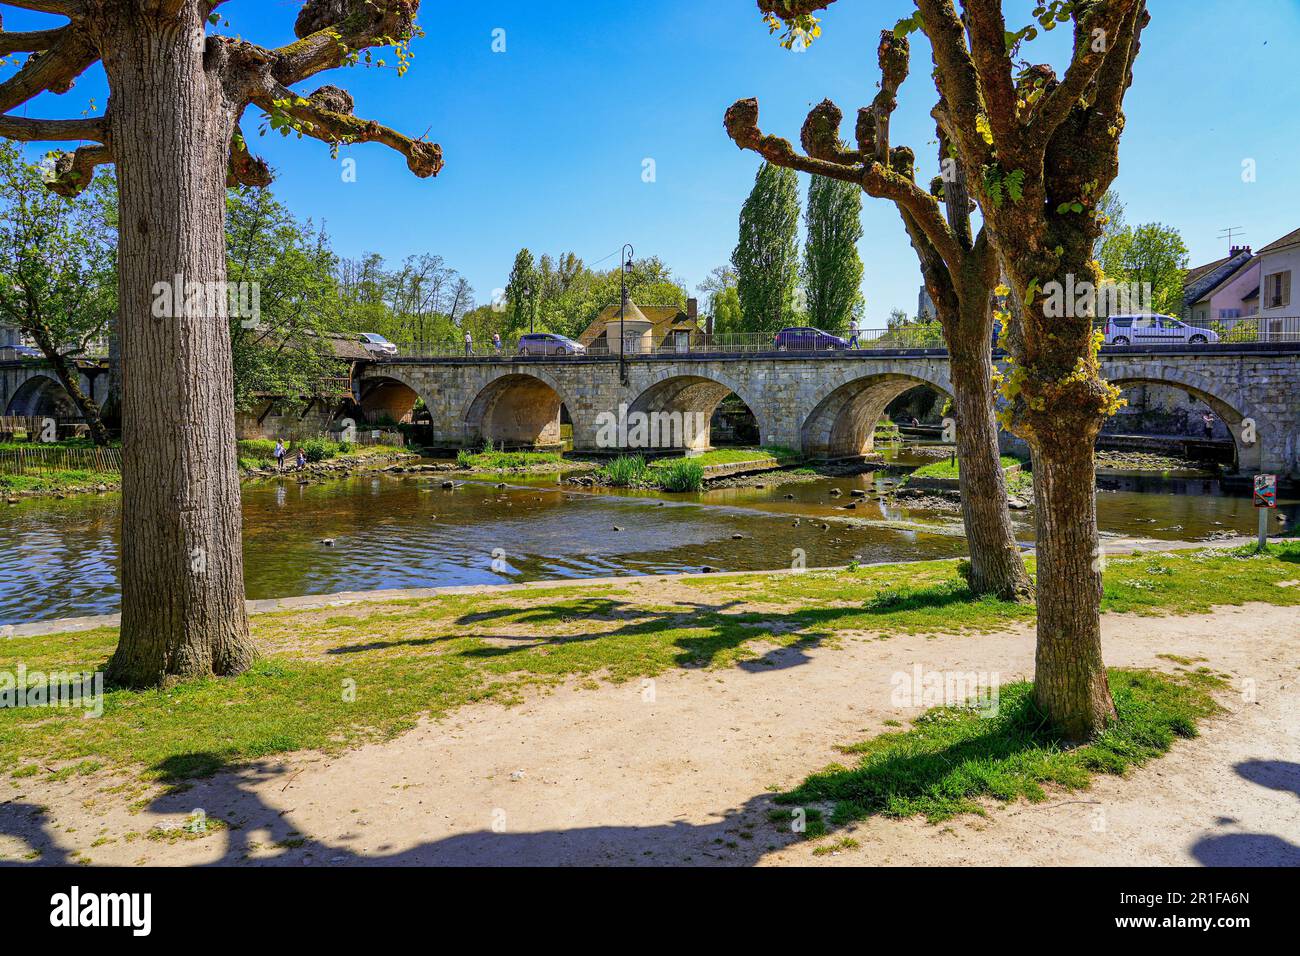 Stone bridge entering the medieval town of Moret-sur-Loing in Seine et Marne, France Stock Photo